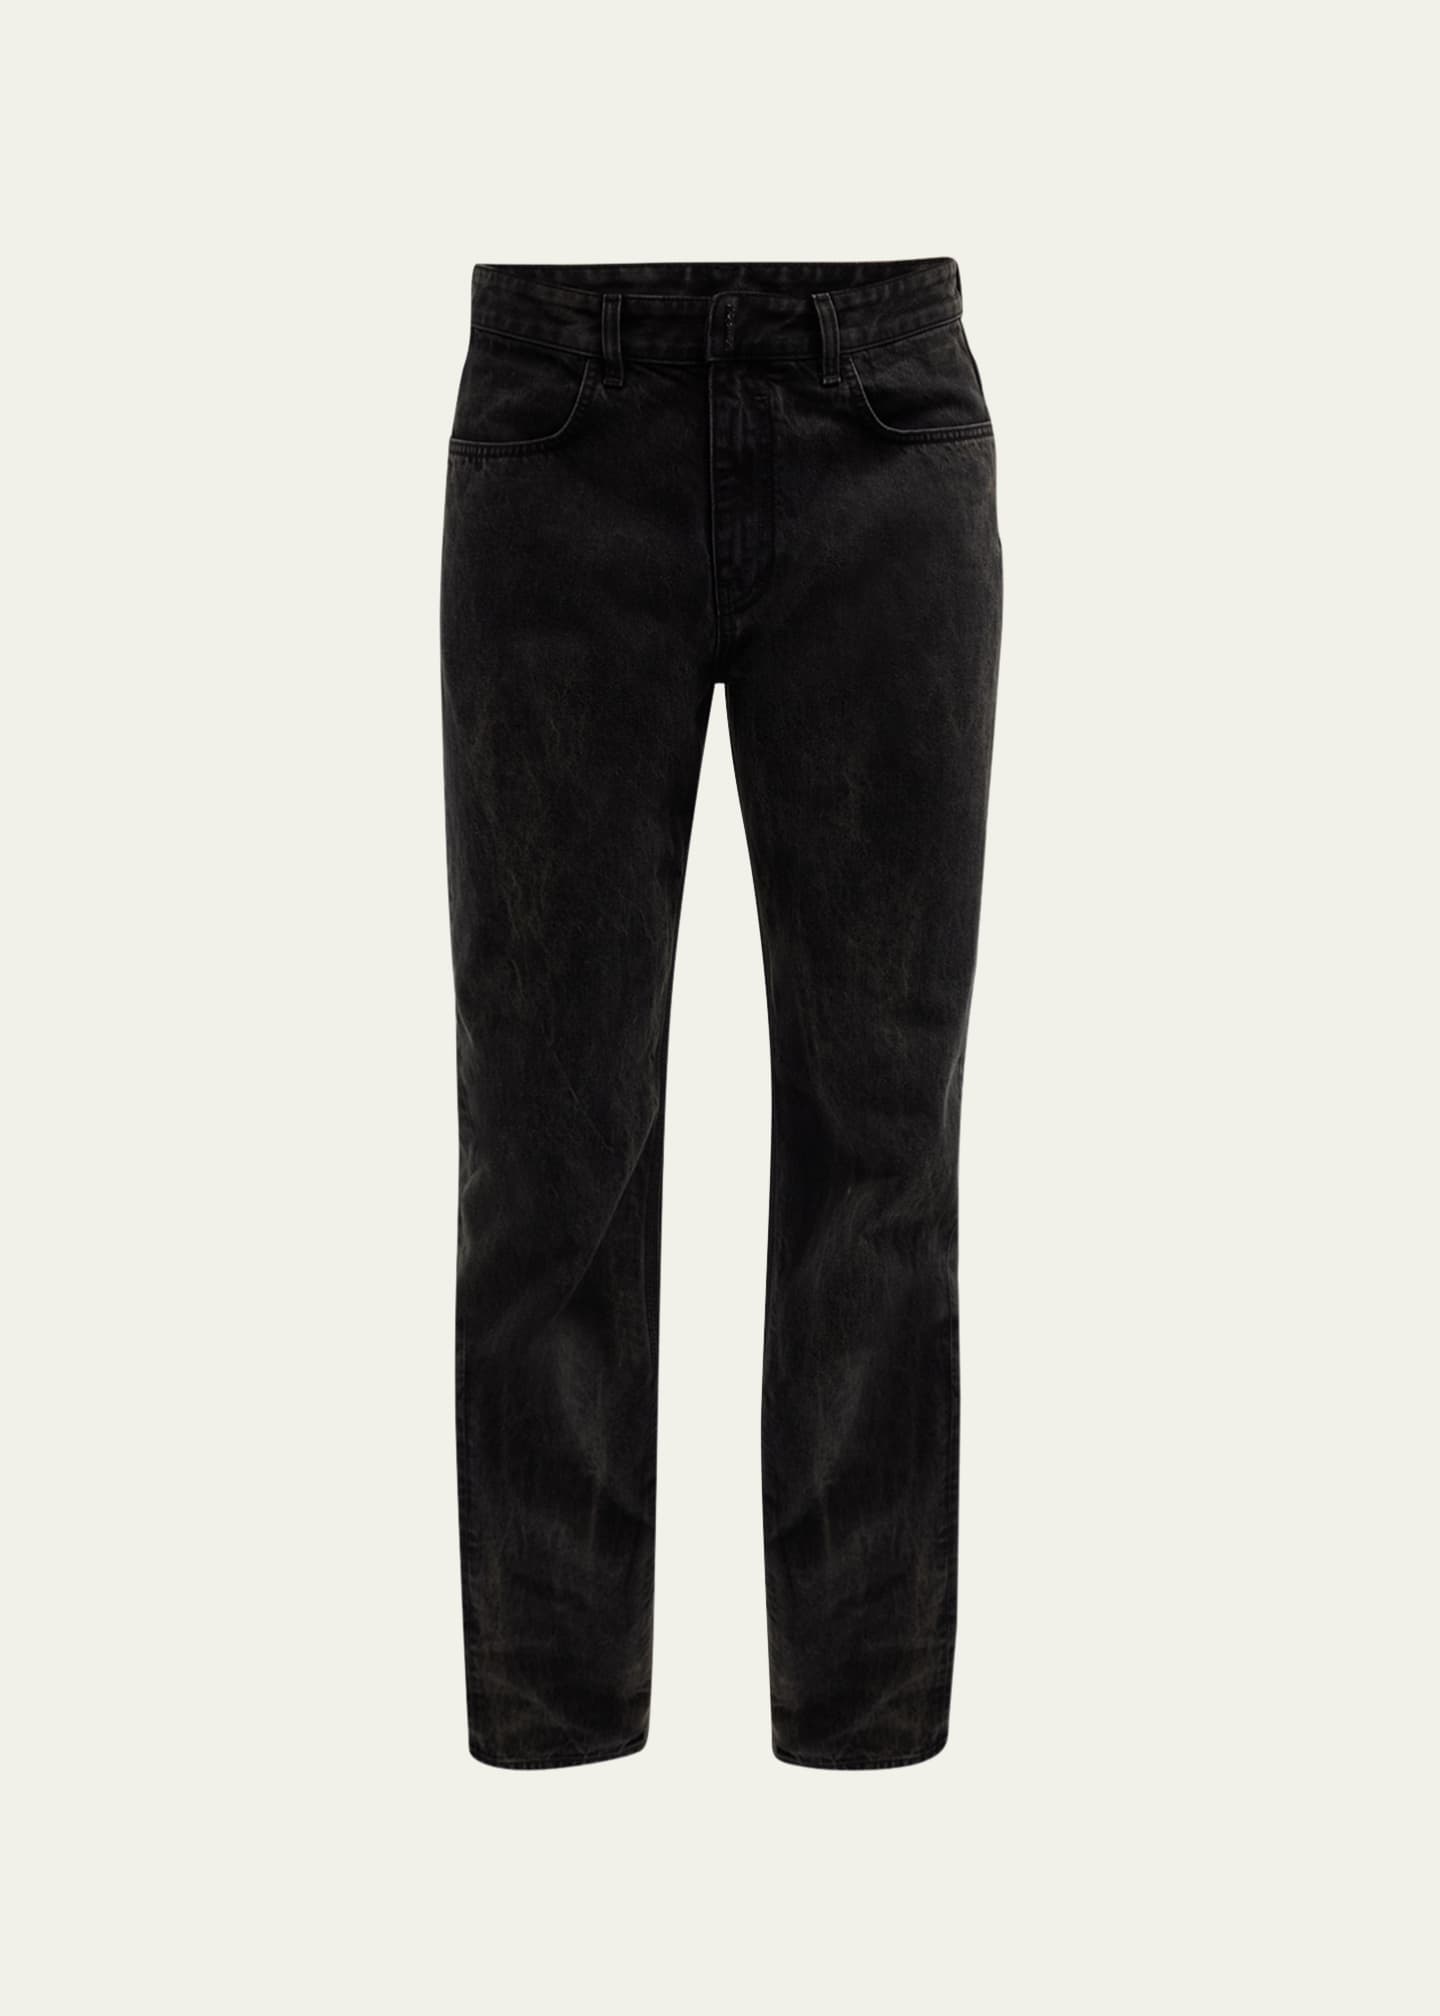 Givenchy Men's Faded Straight-Leg Jeans - Bergdorf Goodman